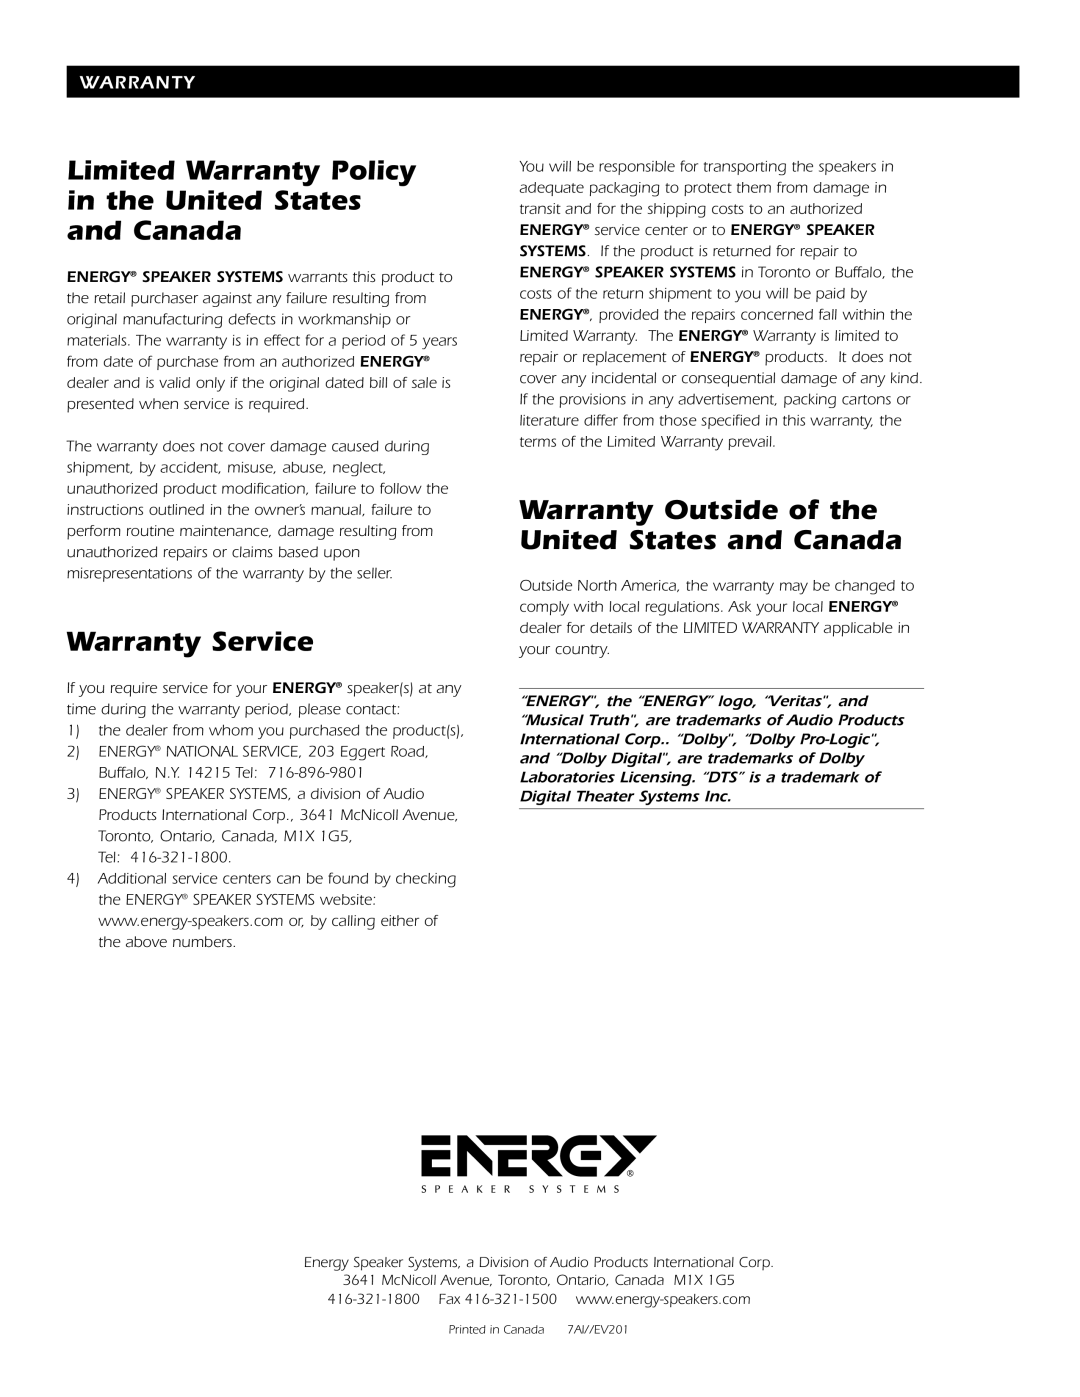 Energy Speaker Systems 7AI manual Limited Warranty Policy in the United States, and Canada, Warranty Service 